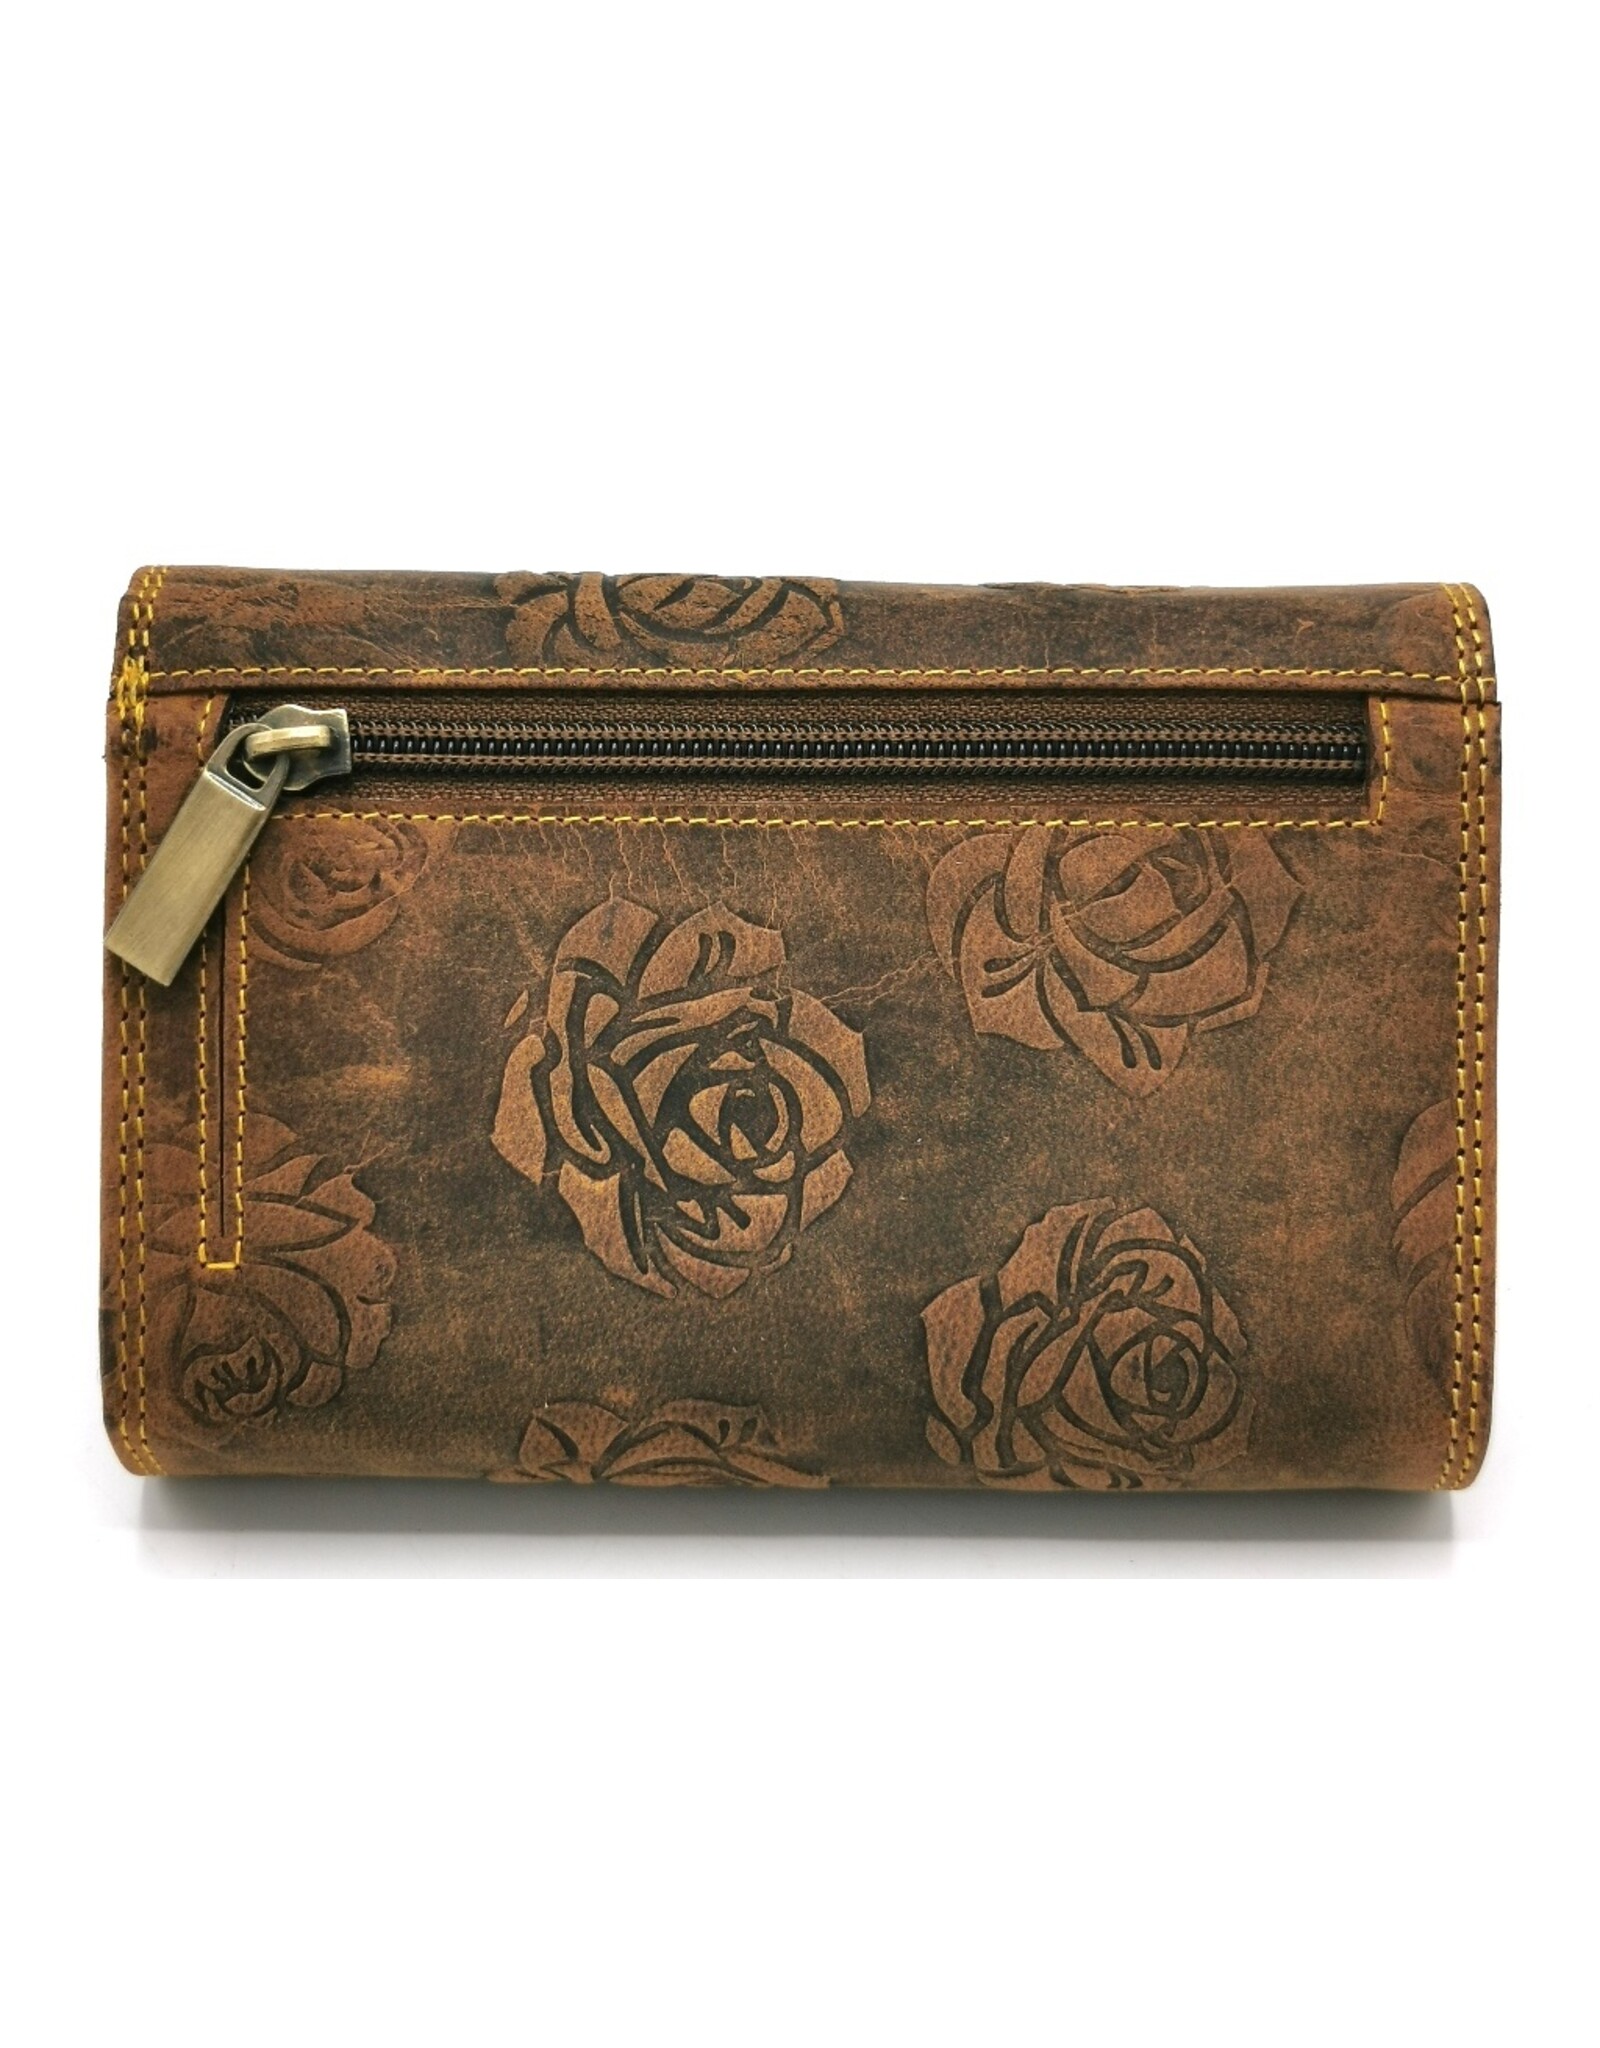 Hunters Leather Wallets - Embossed leather wallet Roses RFID